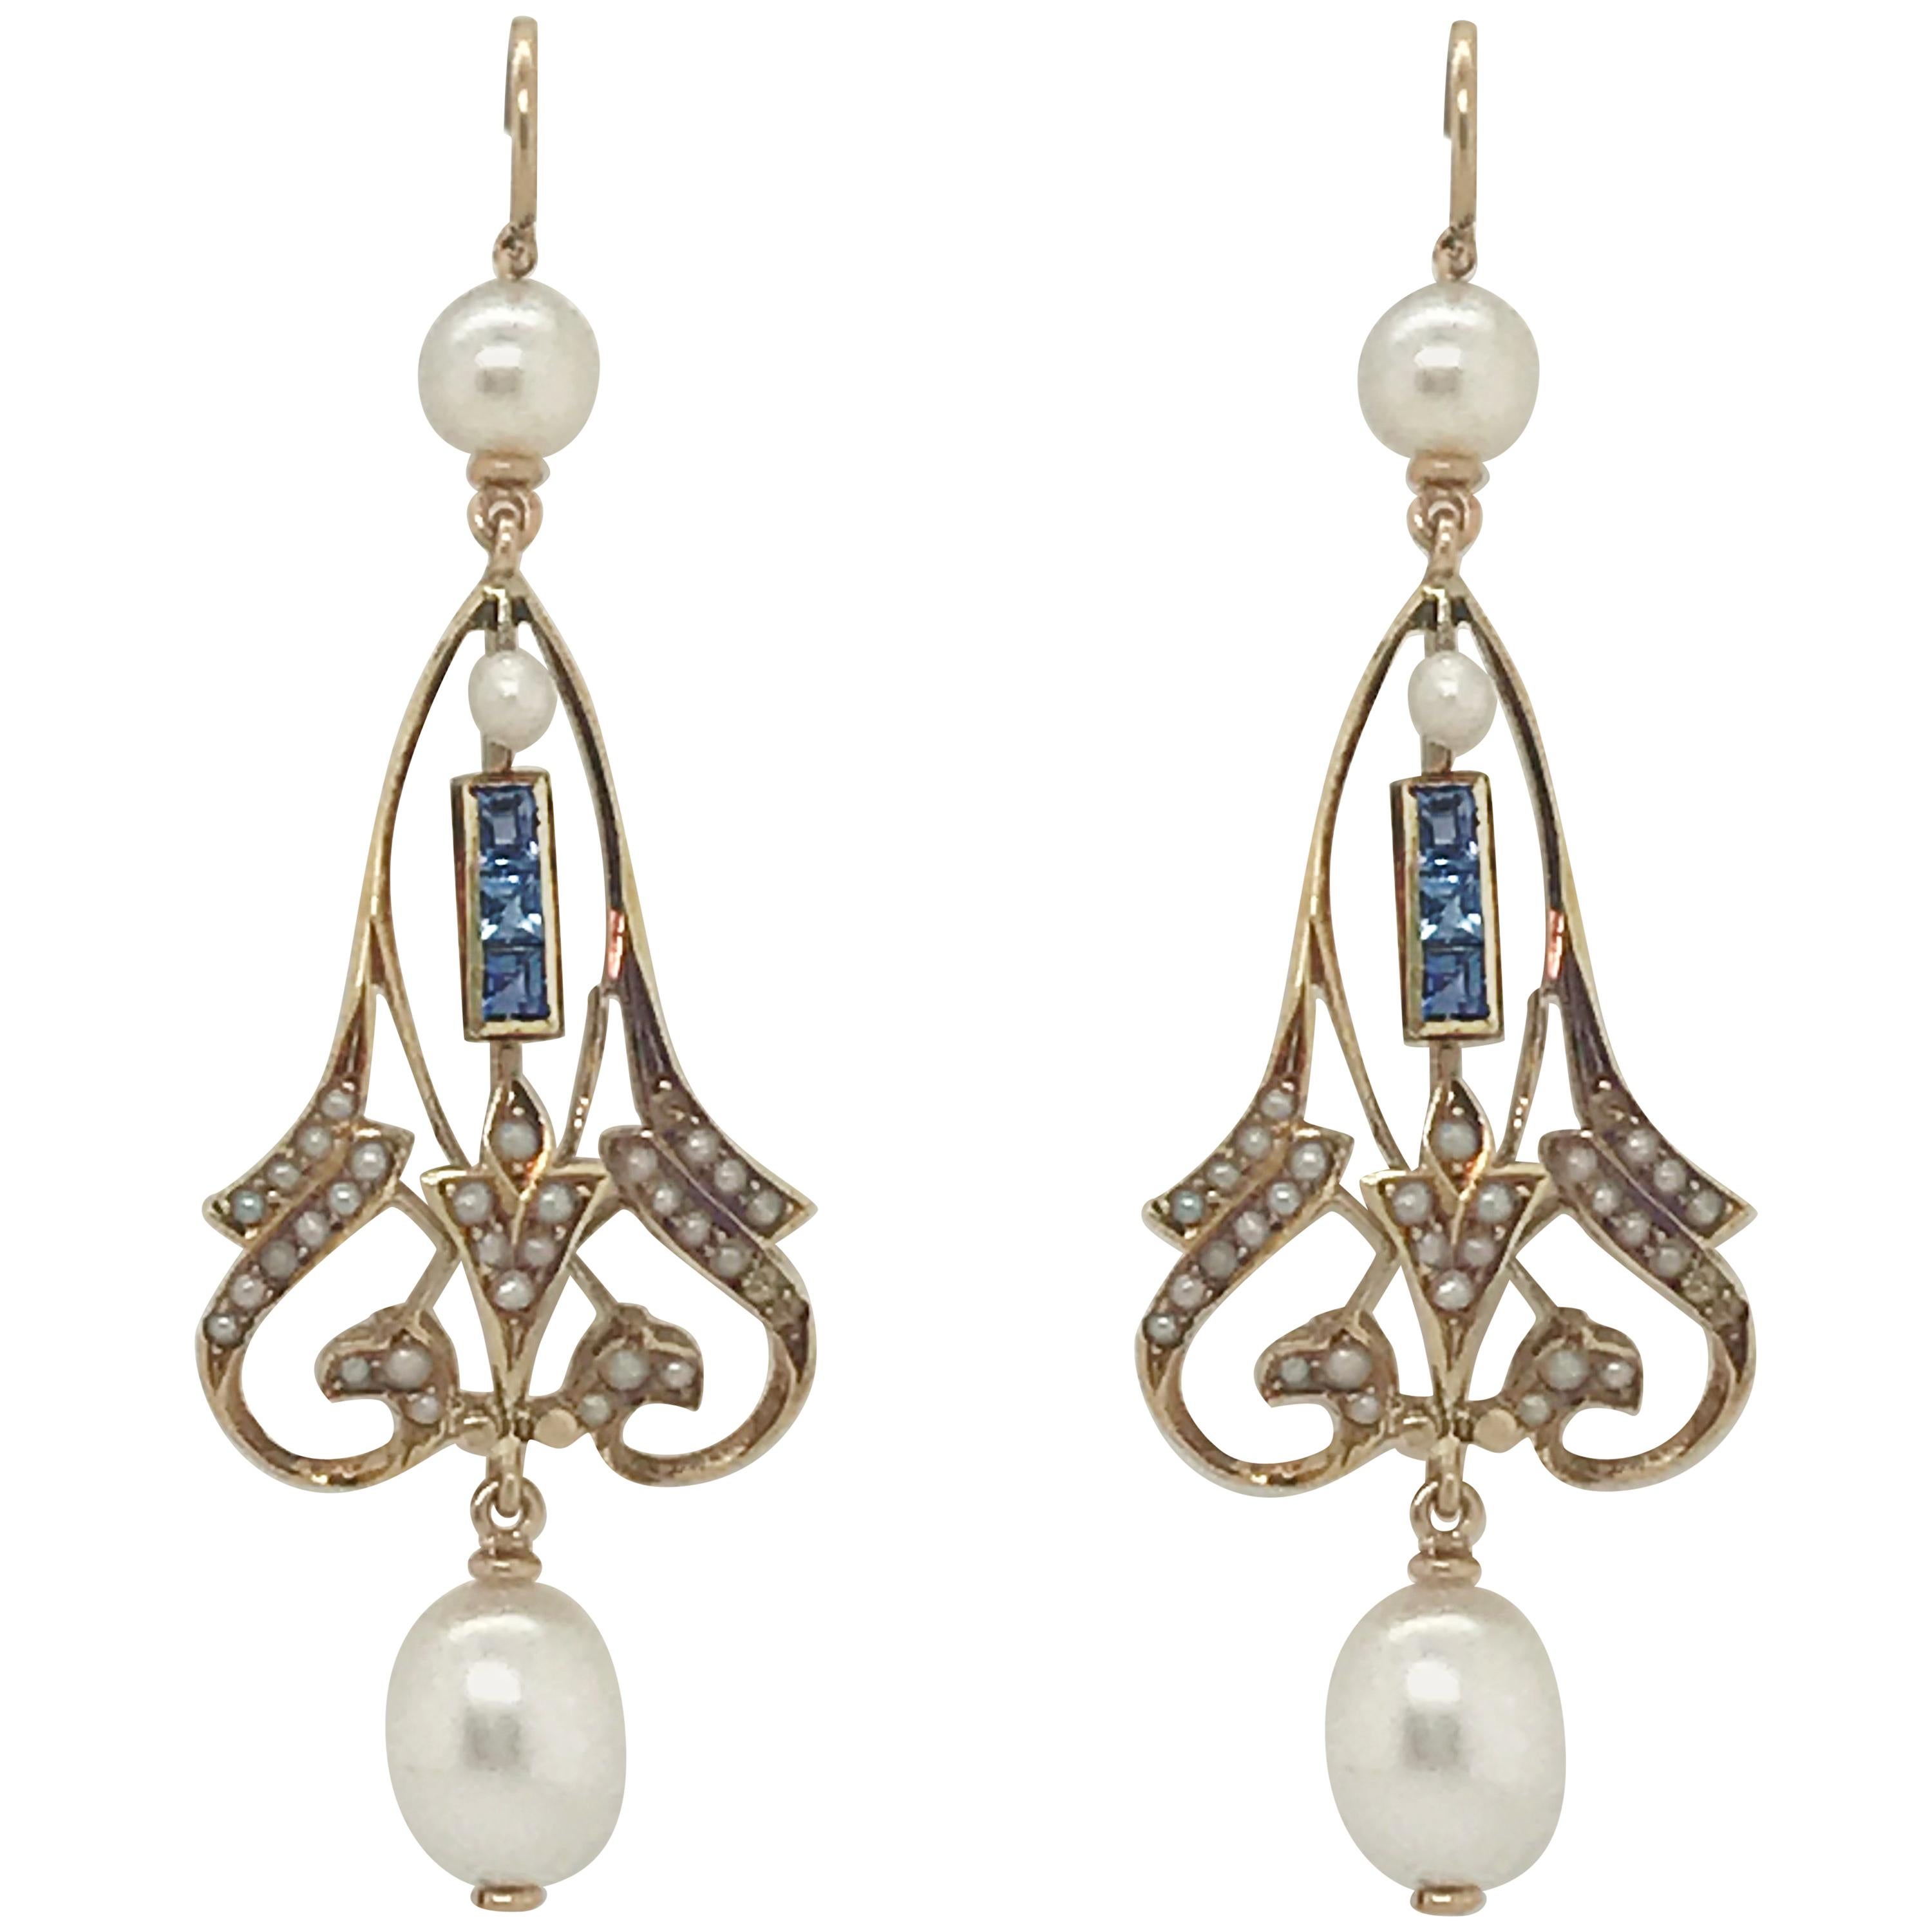 Antique French Cut Sapphire and Pearl Drop Earrings Set in 14 Karat Gold